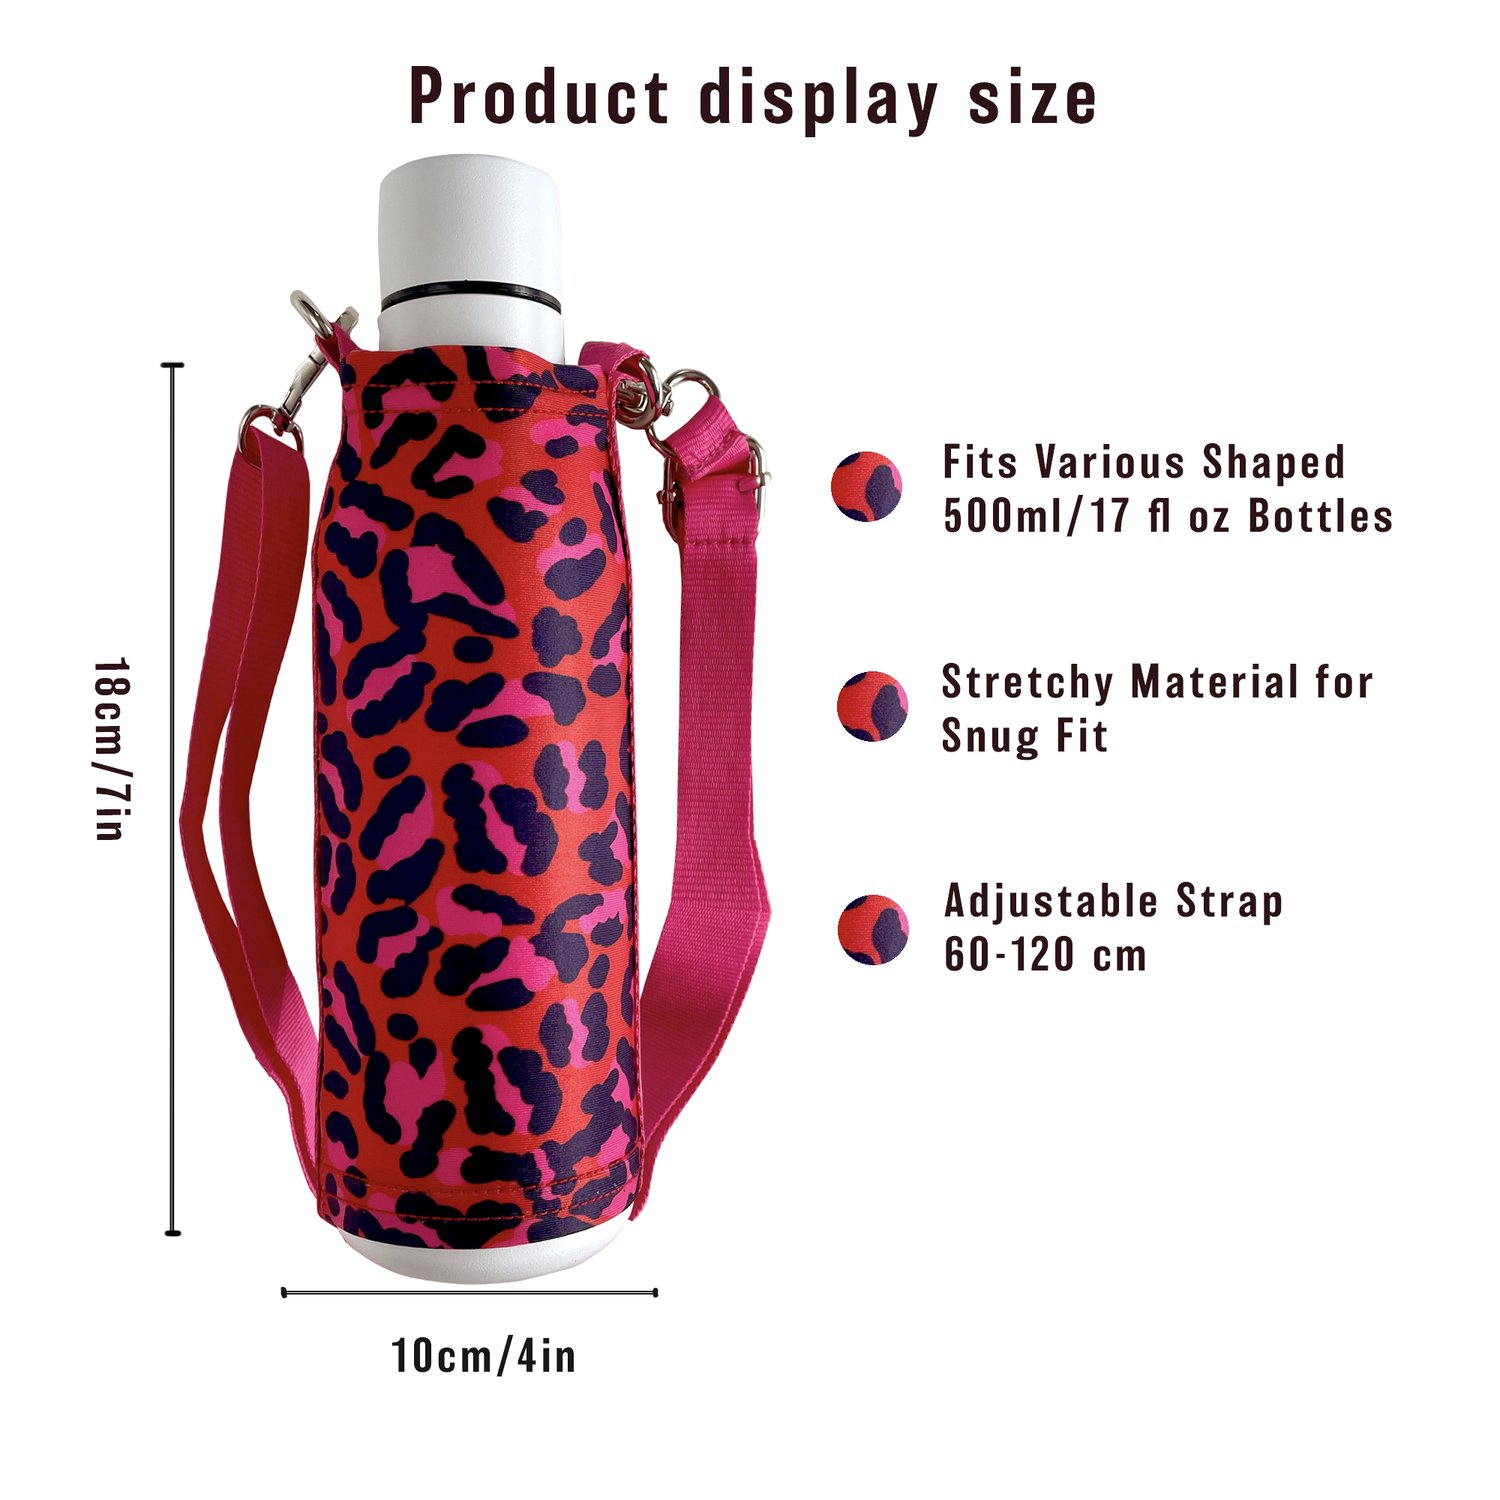 Printed 17 oz. Plastic Water Bottles with Strap